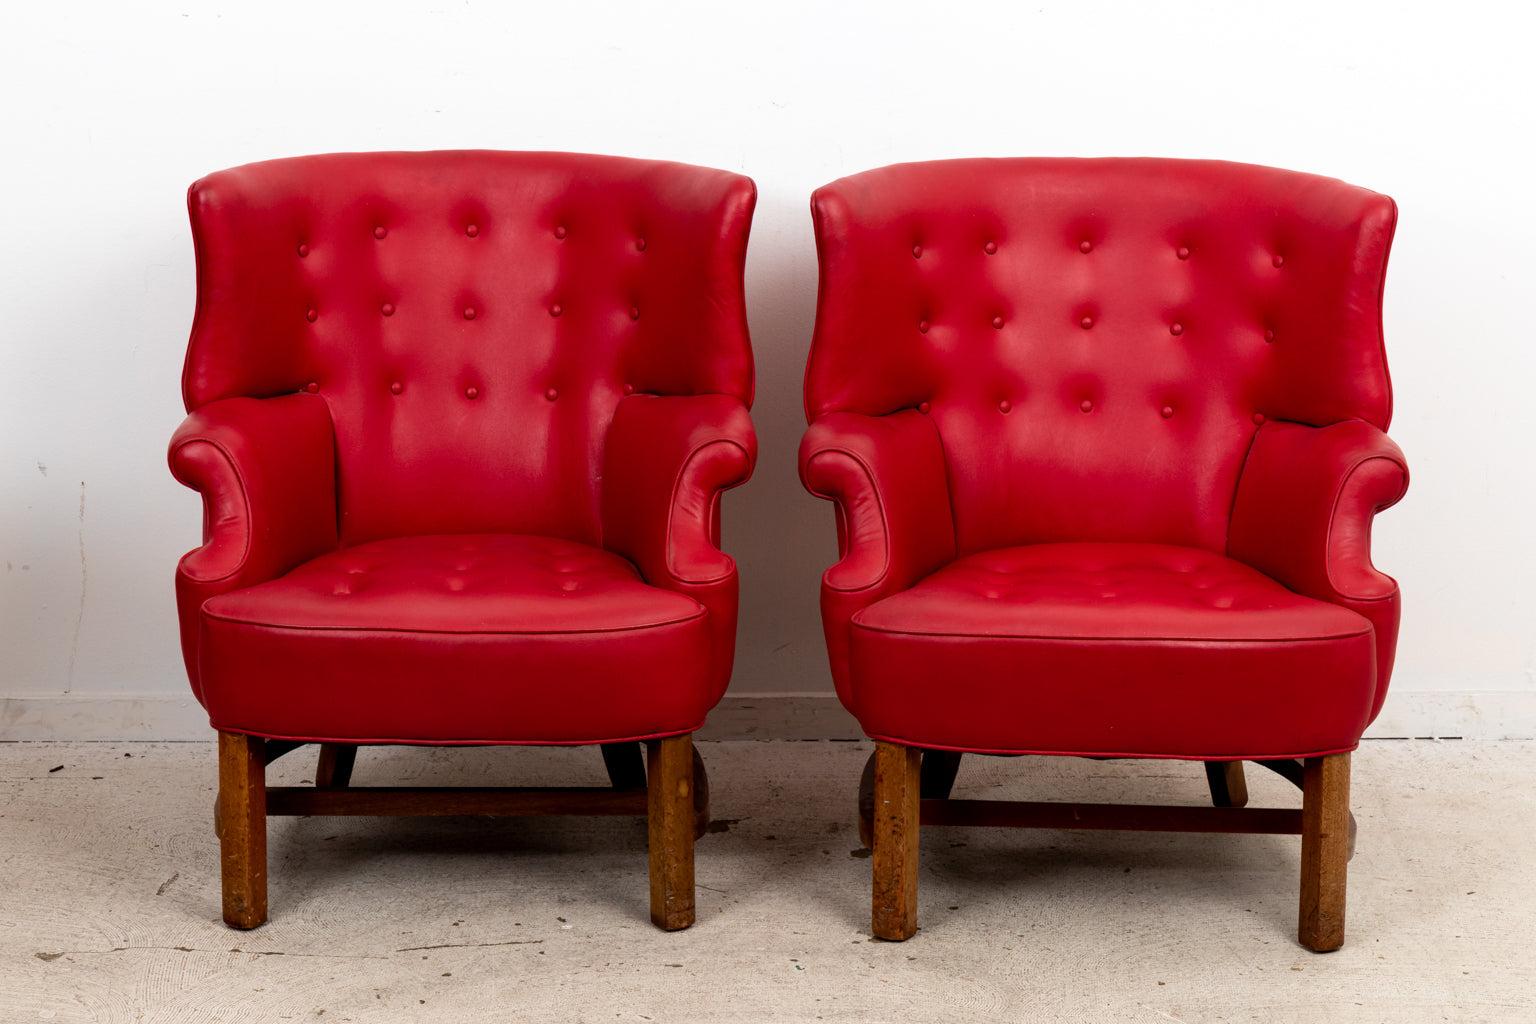 A pair of George III style wing chair upholstered in red vegan leather. The stretcher base follows the contour of the curved back. Two button covers missing on seat of one chair. Wear consistent with age.